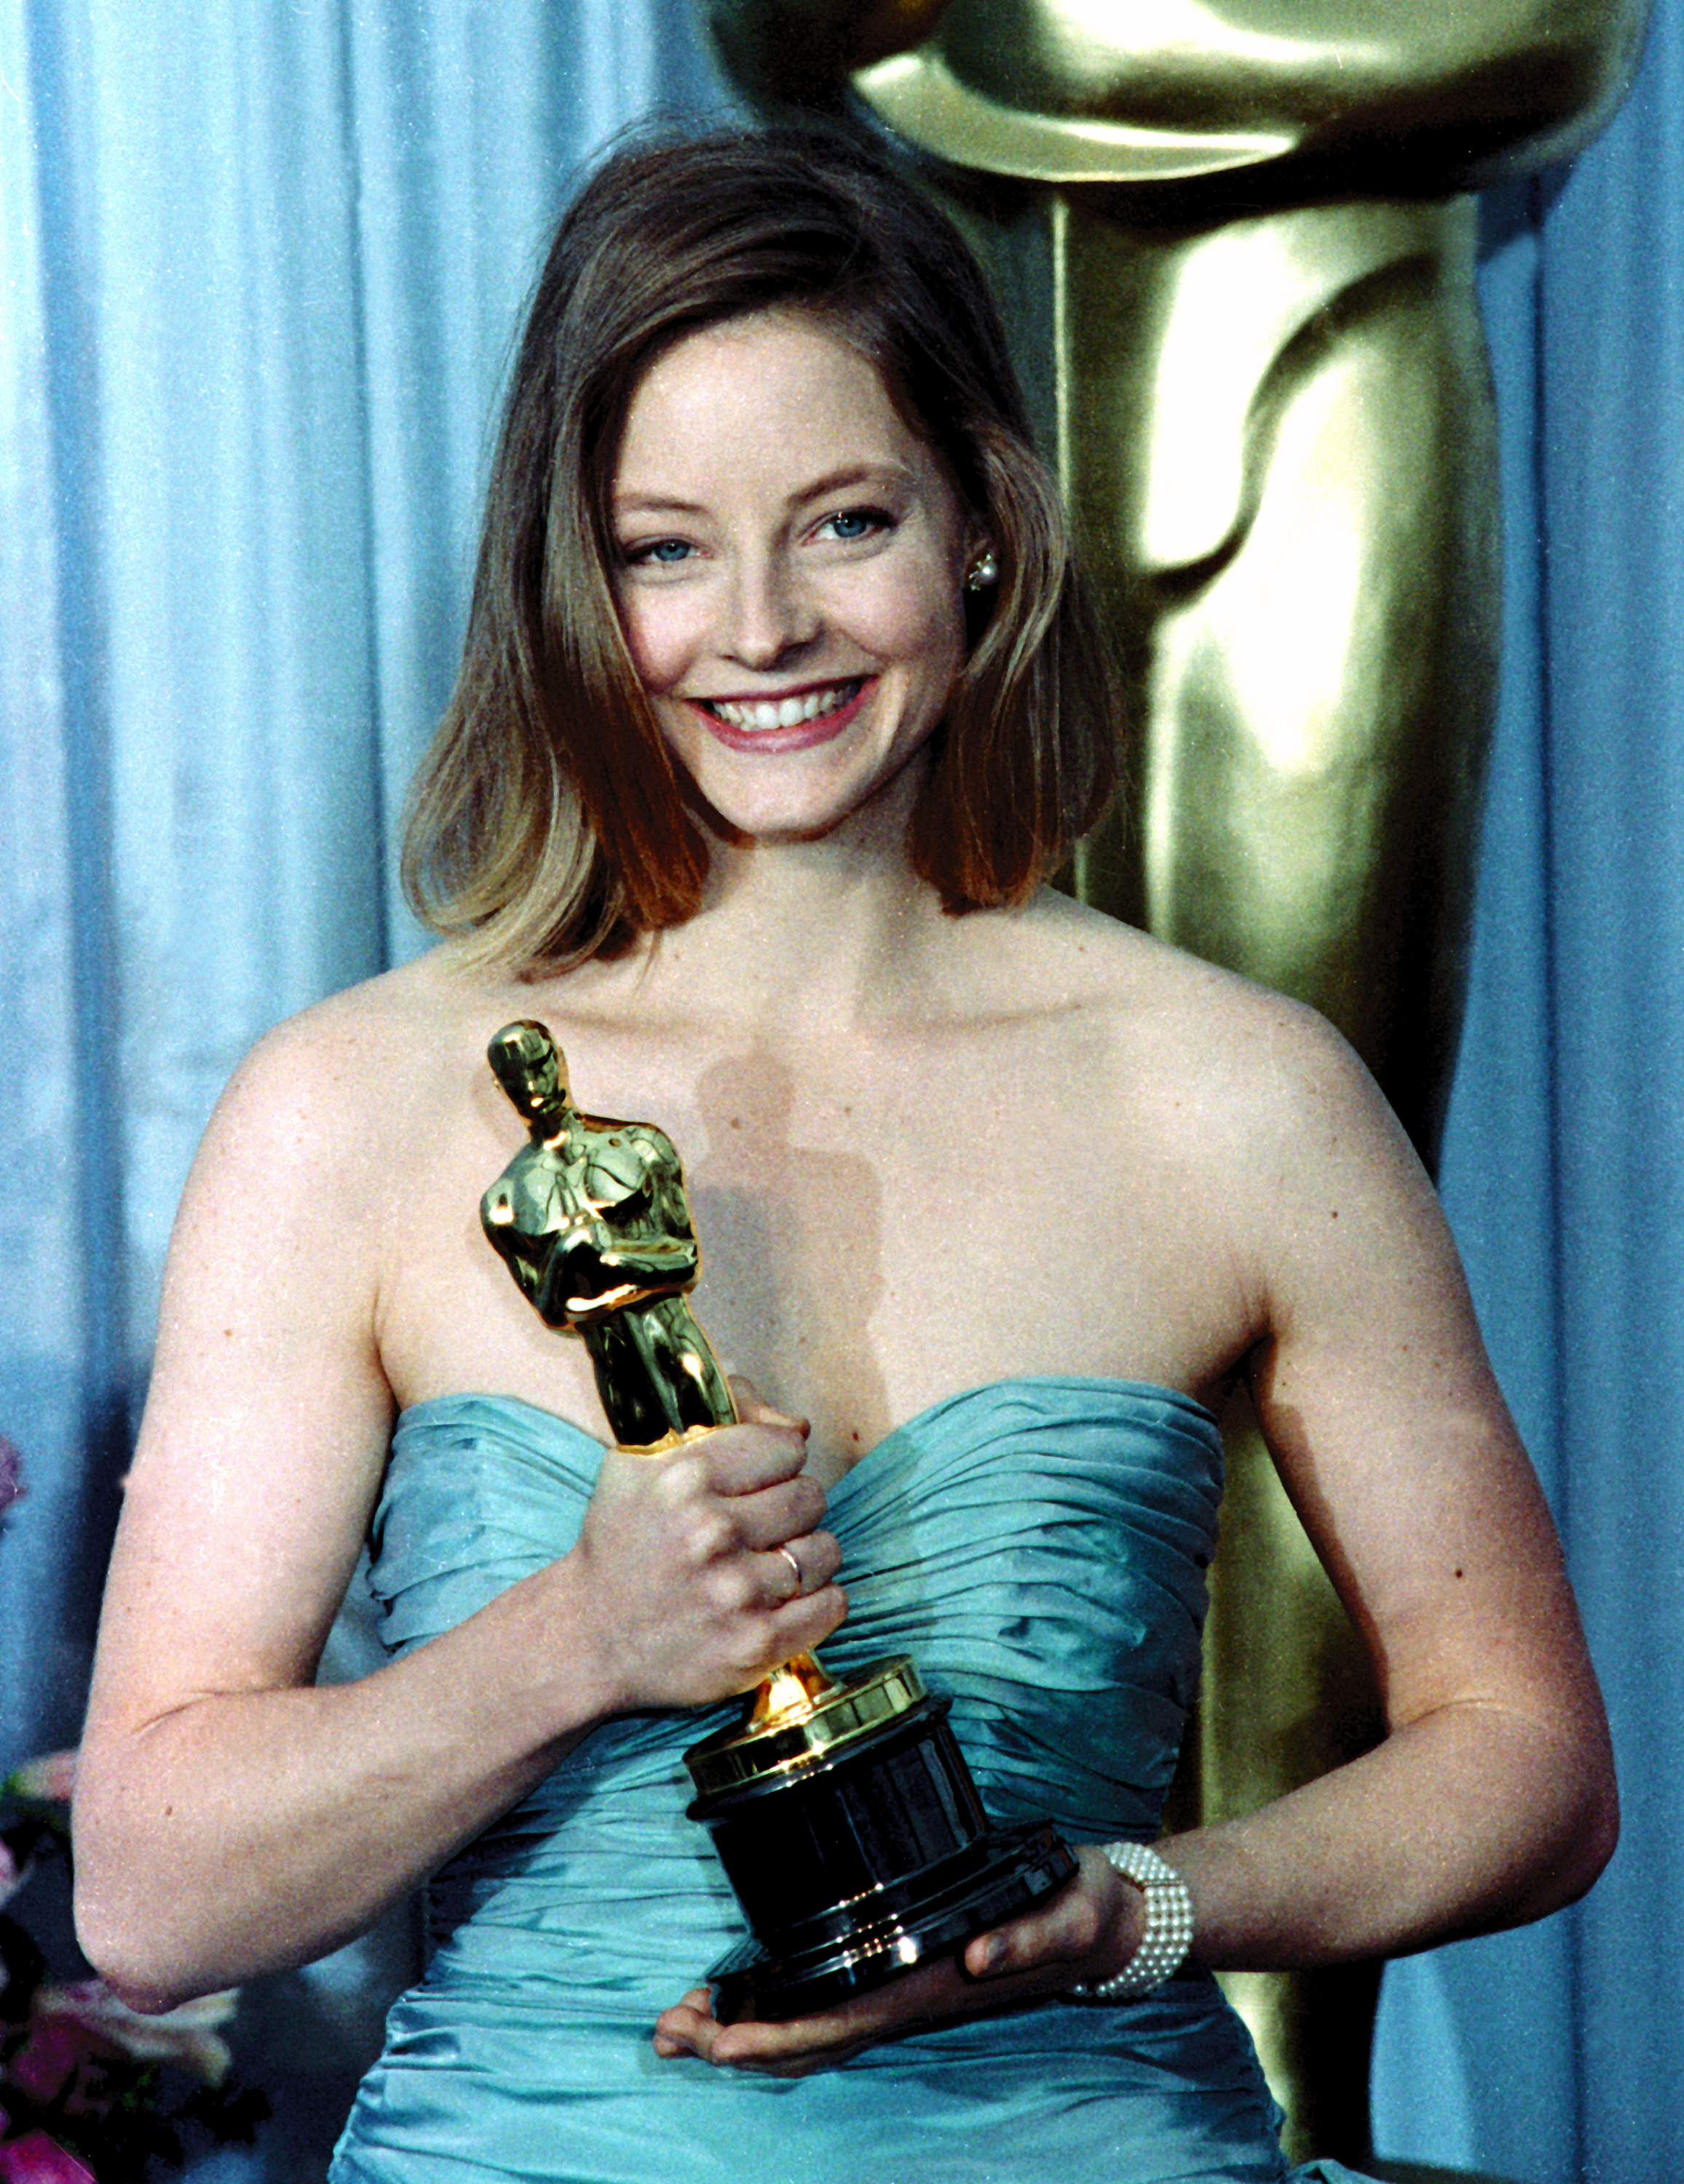 Jodie Foster backstage at the Academy Awards after winning the Best Actress category in Los Angeles, 1989 | Source: Getty Images